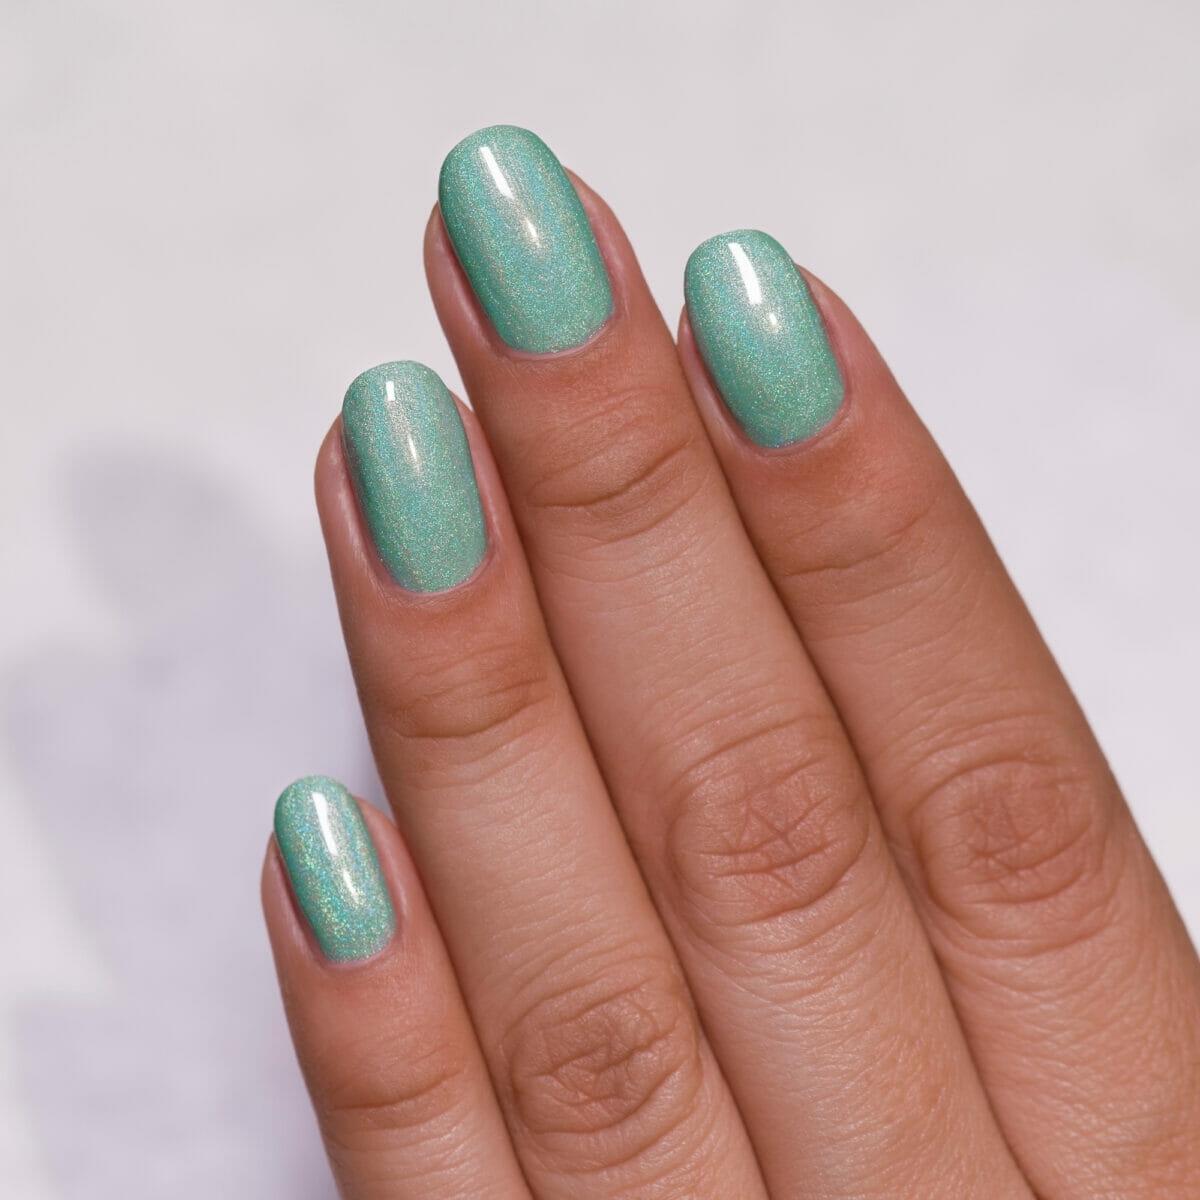 Princeton - Refined Mint Green Holographic Nail Polish by ILNP